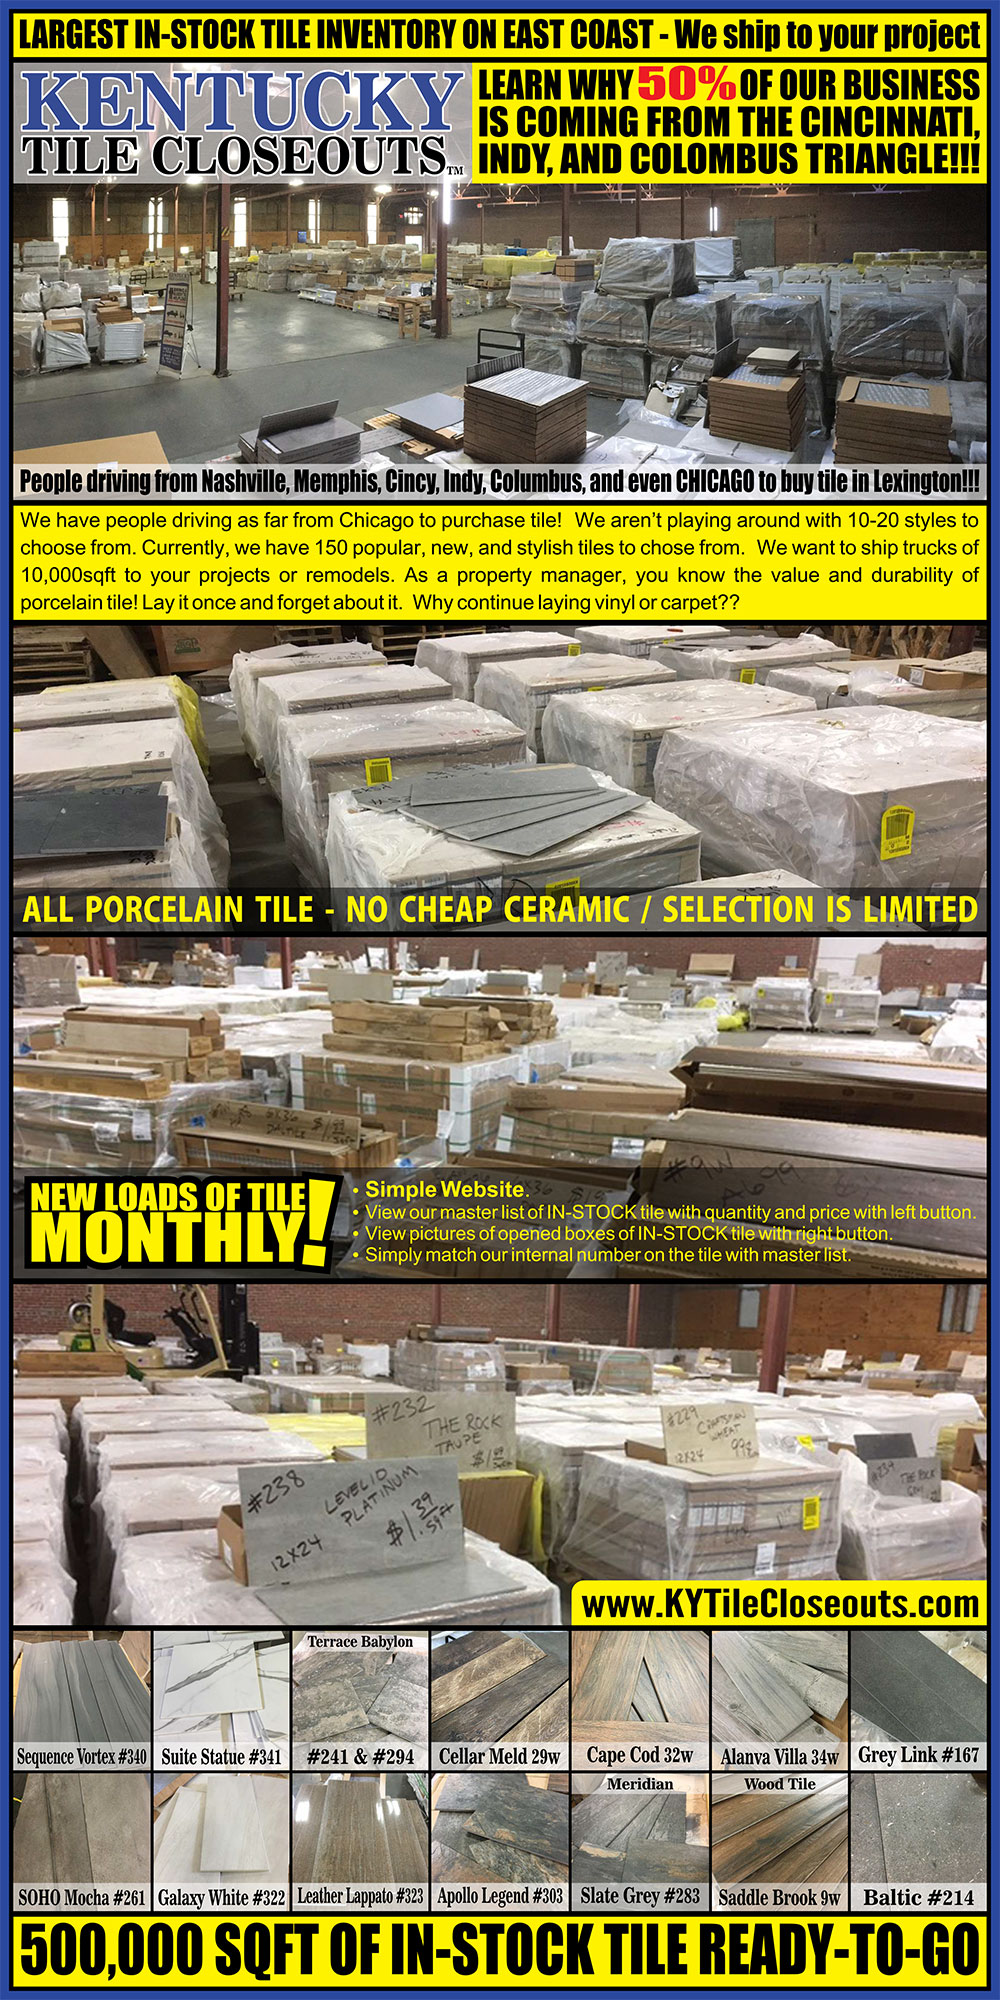 Over 400,000 sqft in-stock & ready to go today - Kentucky Tile Closeouts - home - basement - office - showroom - kitchen - batchroom - mancave